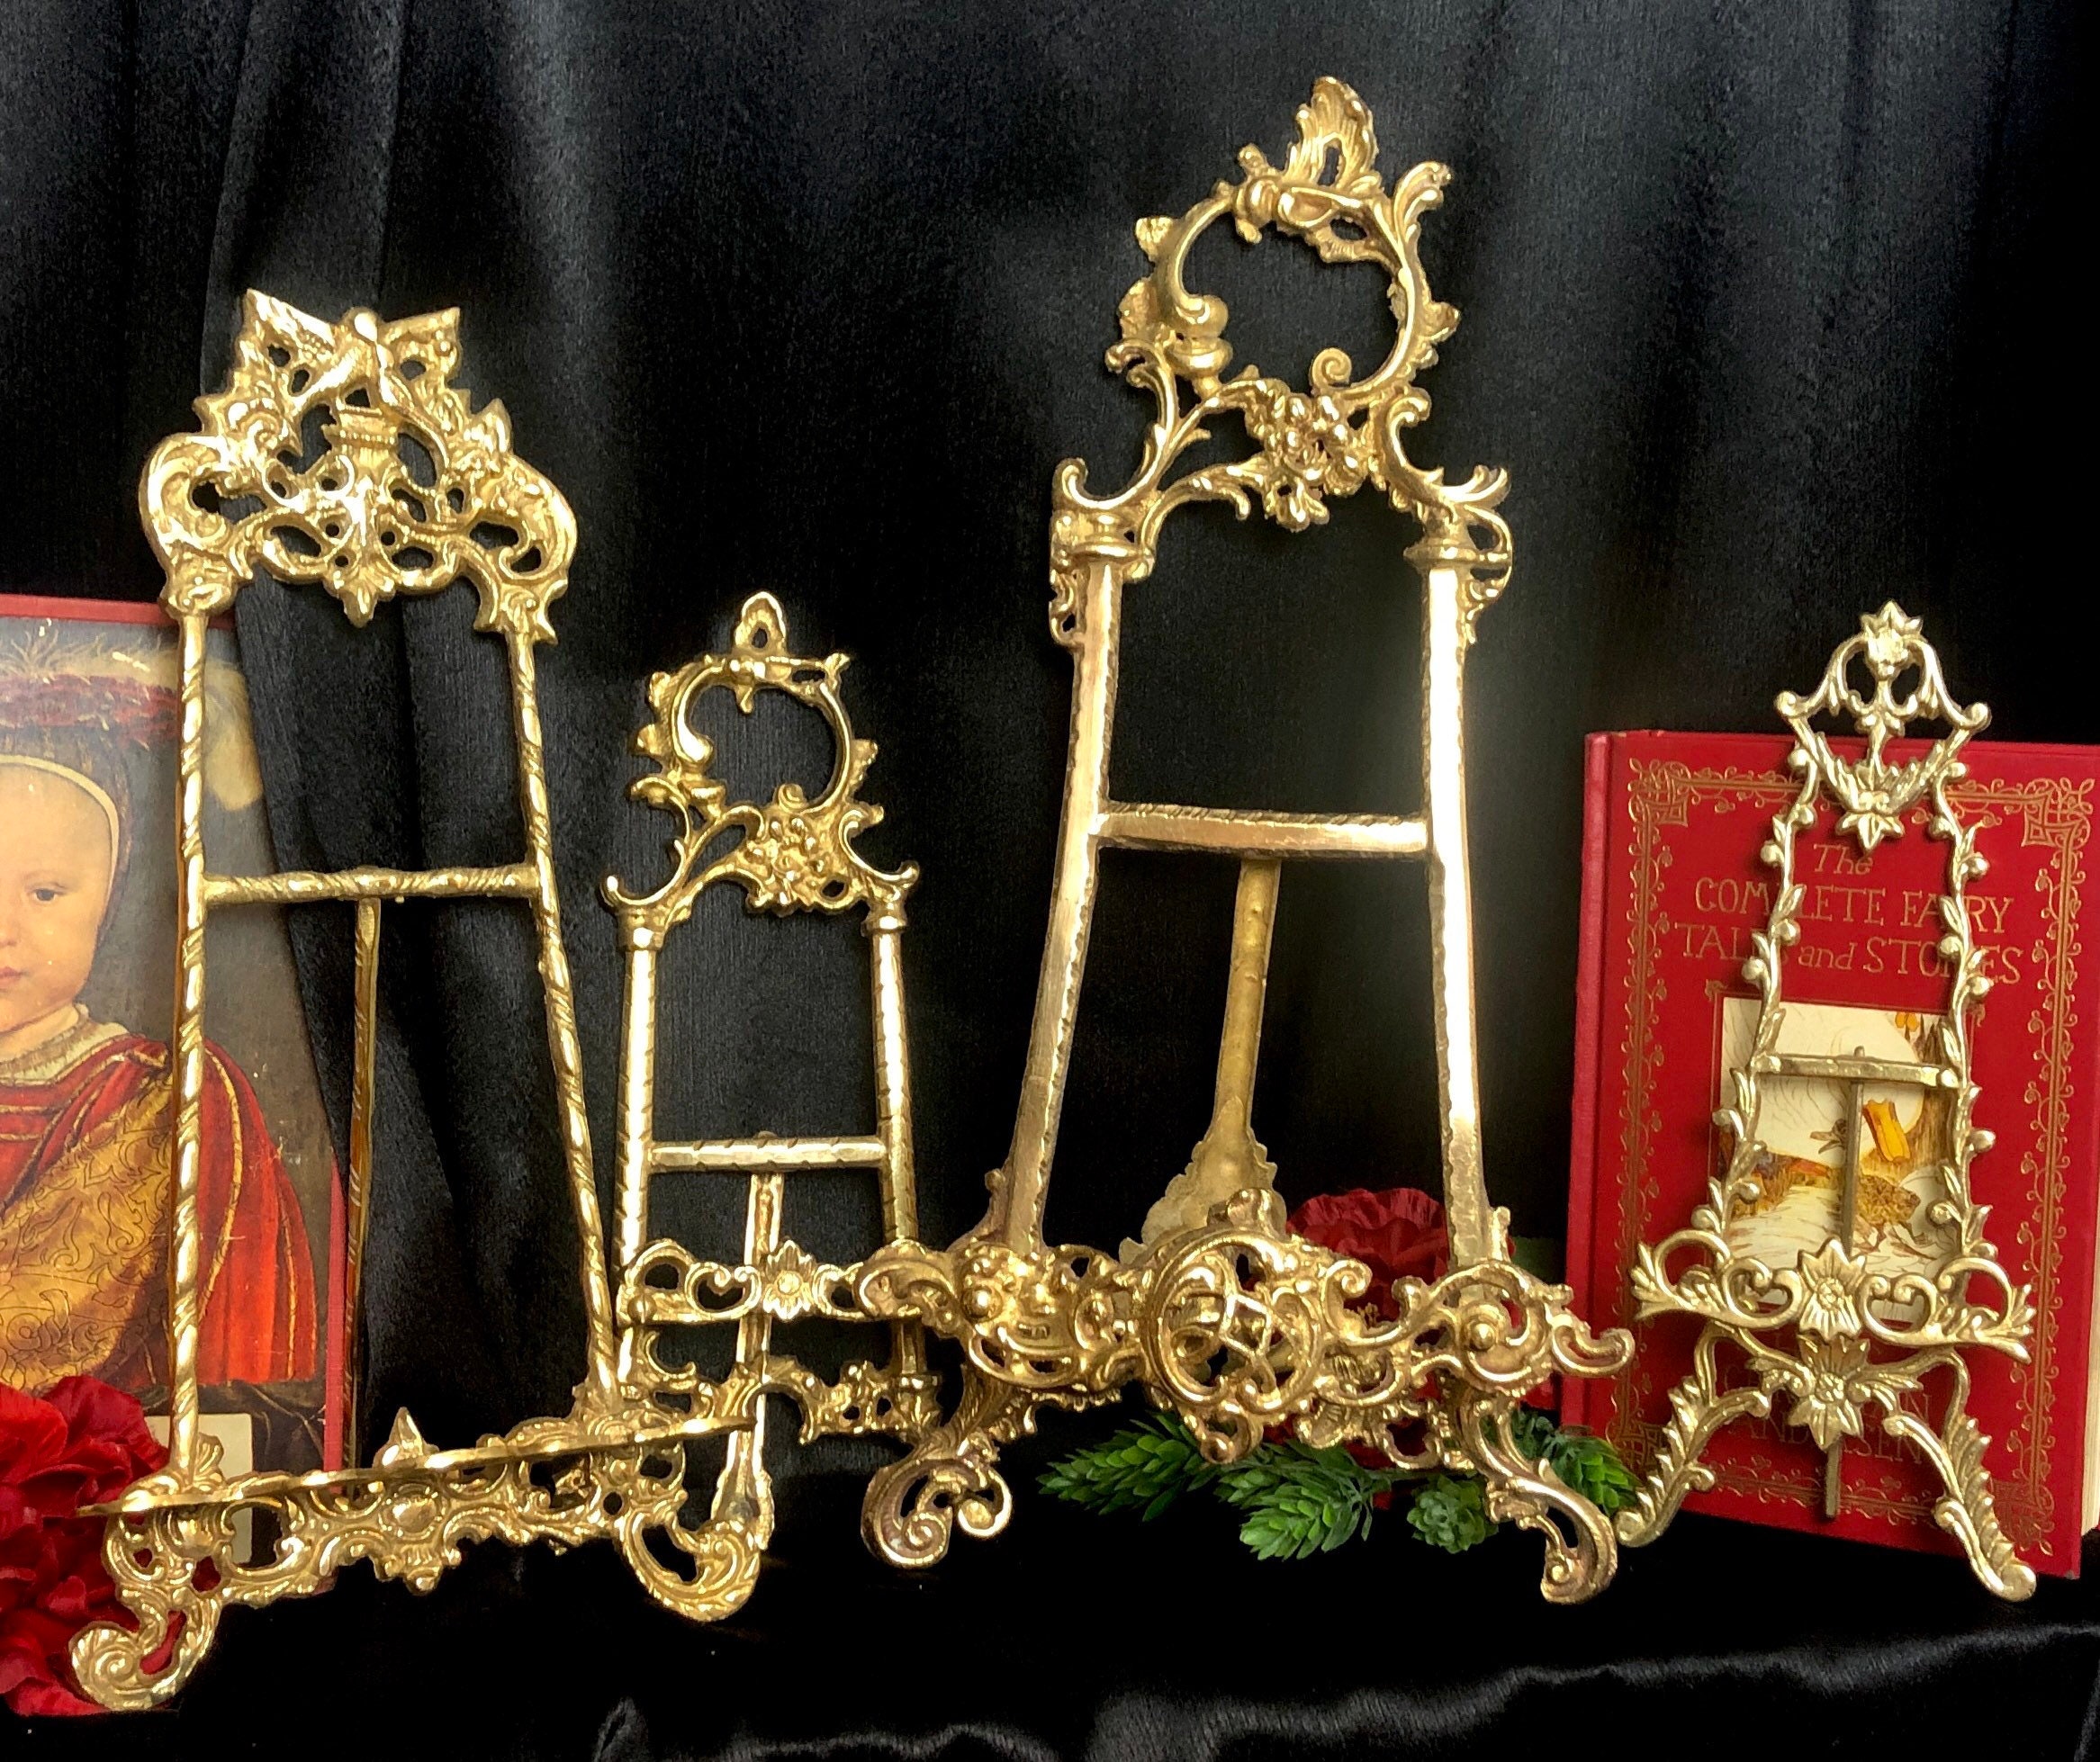 Brass Picture Stands, Book Holders Victorian Decorative Display stands -  Set 4